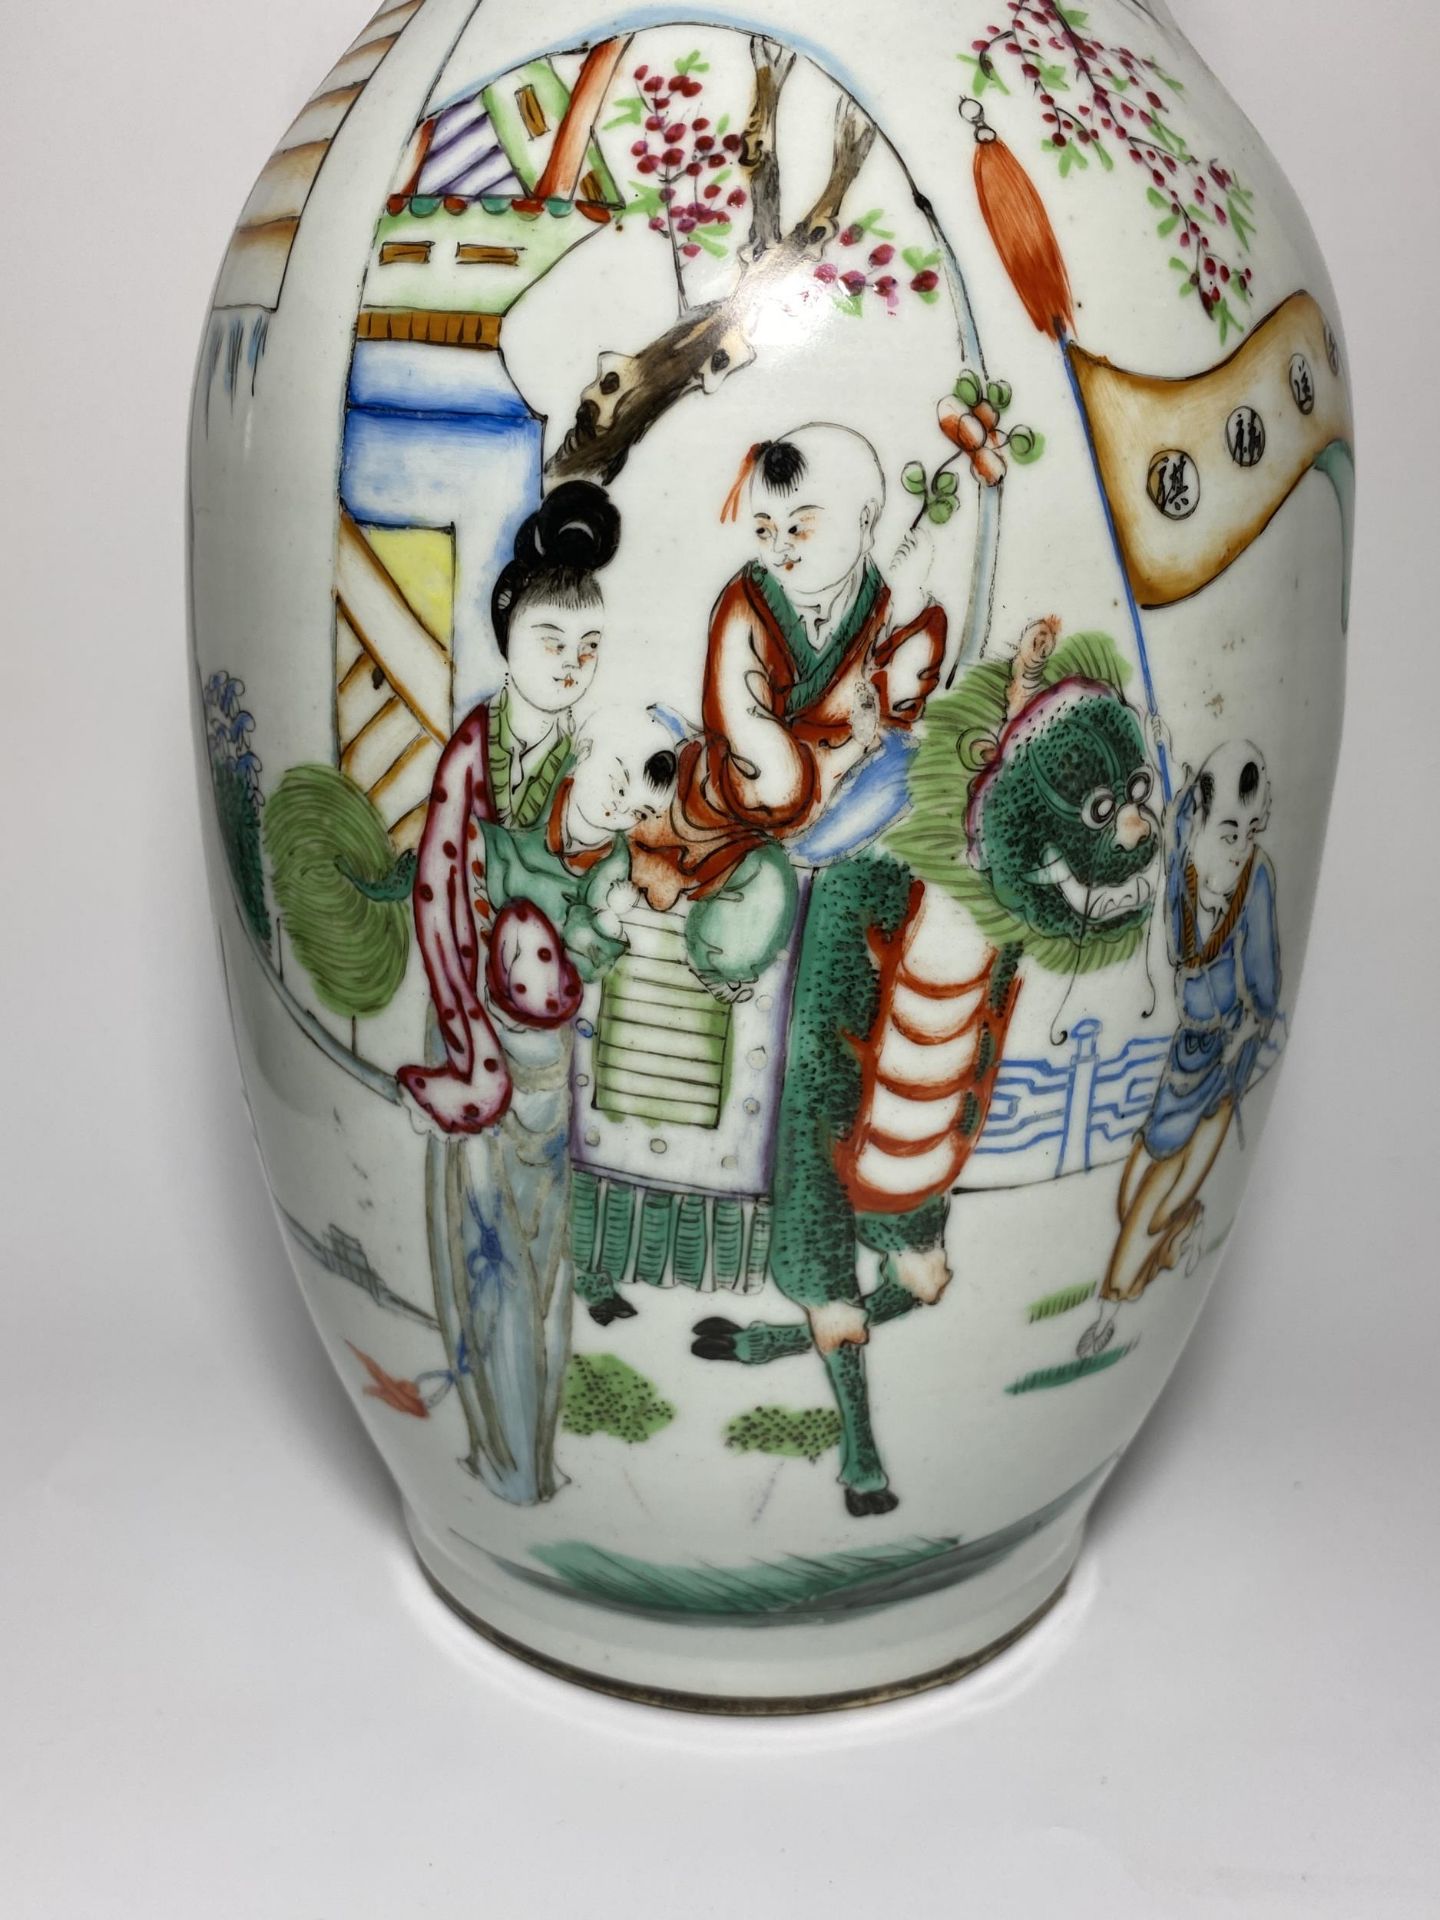 A LARGE 19TH CENTURY CHINESE QING PORCELAIN VASE WITH FIGURAL & CALLIGRAPHY DESIGN, HEIGHT 43CM - Image 2 of 11